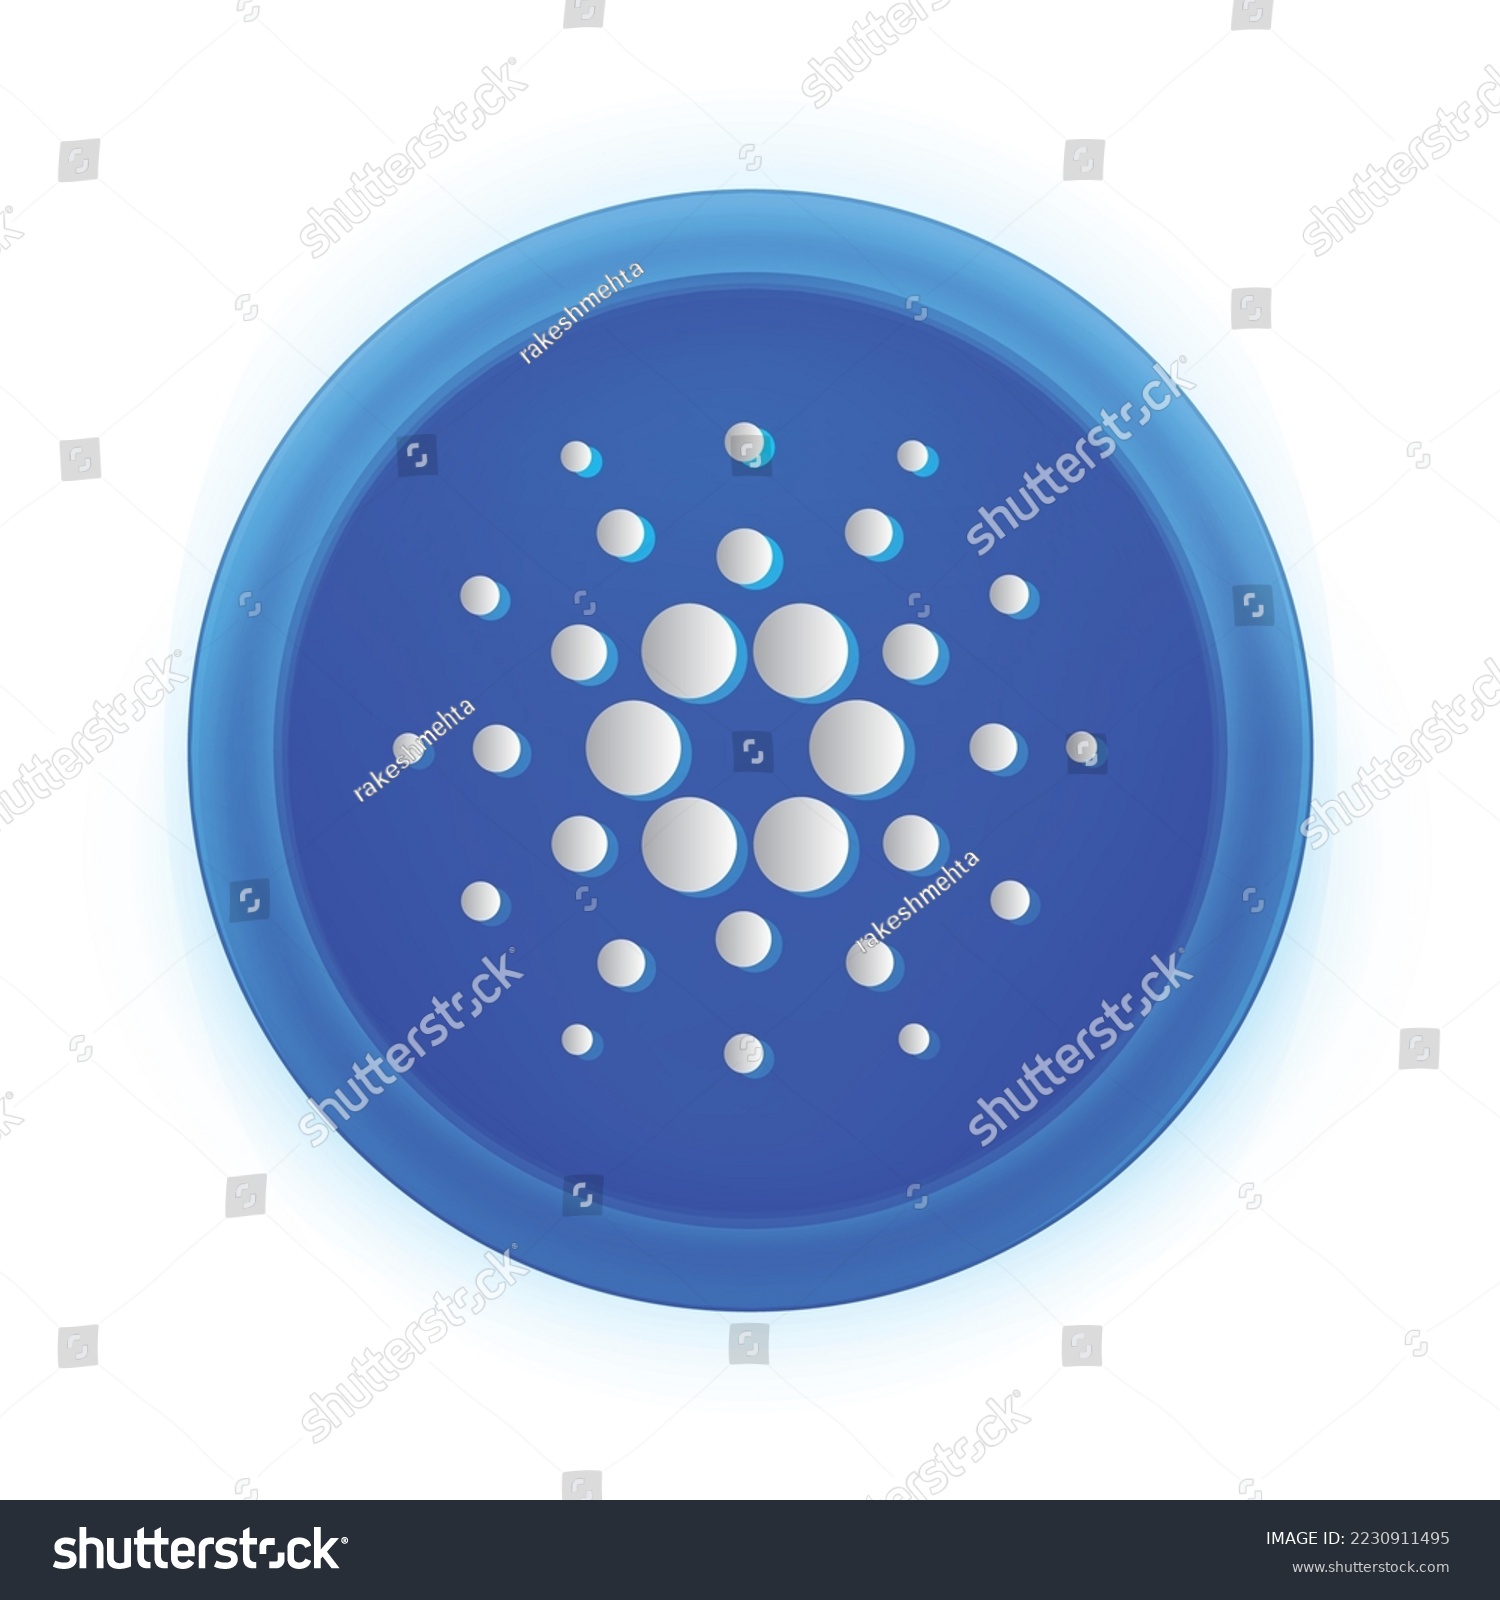 SVG of Cardano (ADA) crypto logo isolated on white background. ADA  Cryptocurrency coin token vector svg